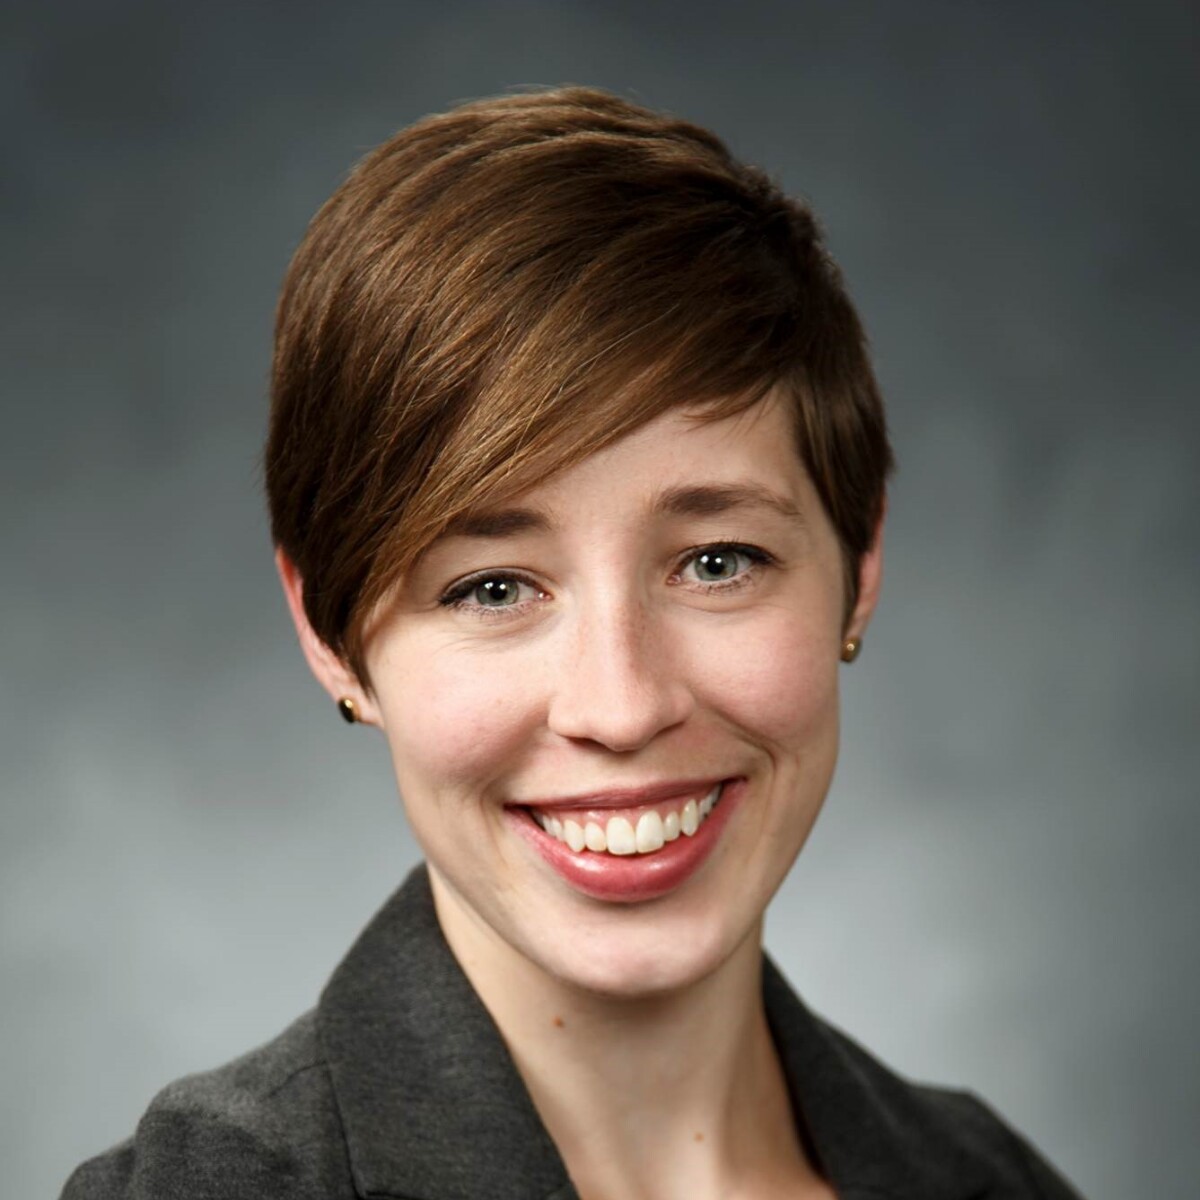 .@SDSUCHEPS and @SdsuEcon welcome @emilycleslie @BYUecon to present: “The Long-Term Economic Effects of DWIs” Join us on Thursday 02/15 at 3,30PM PT in AL 660 or via zoom (sdsu.zoom.us/j/88923406625)